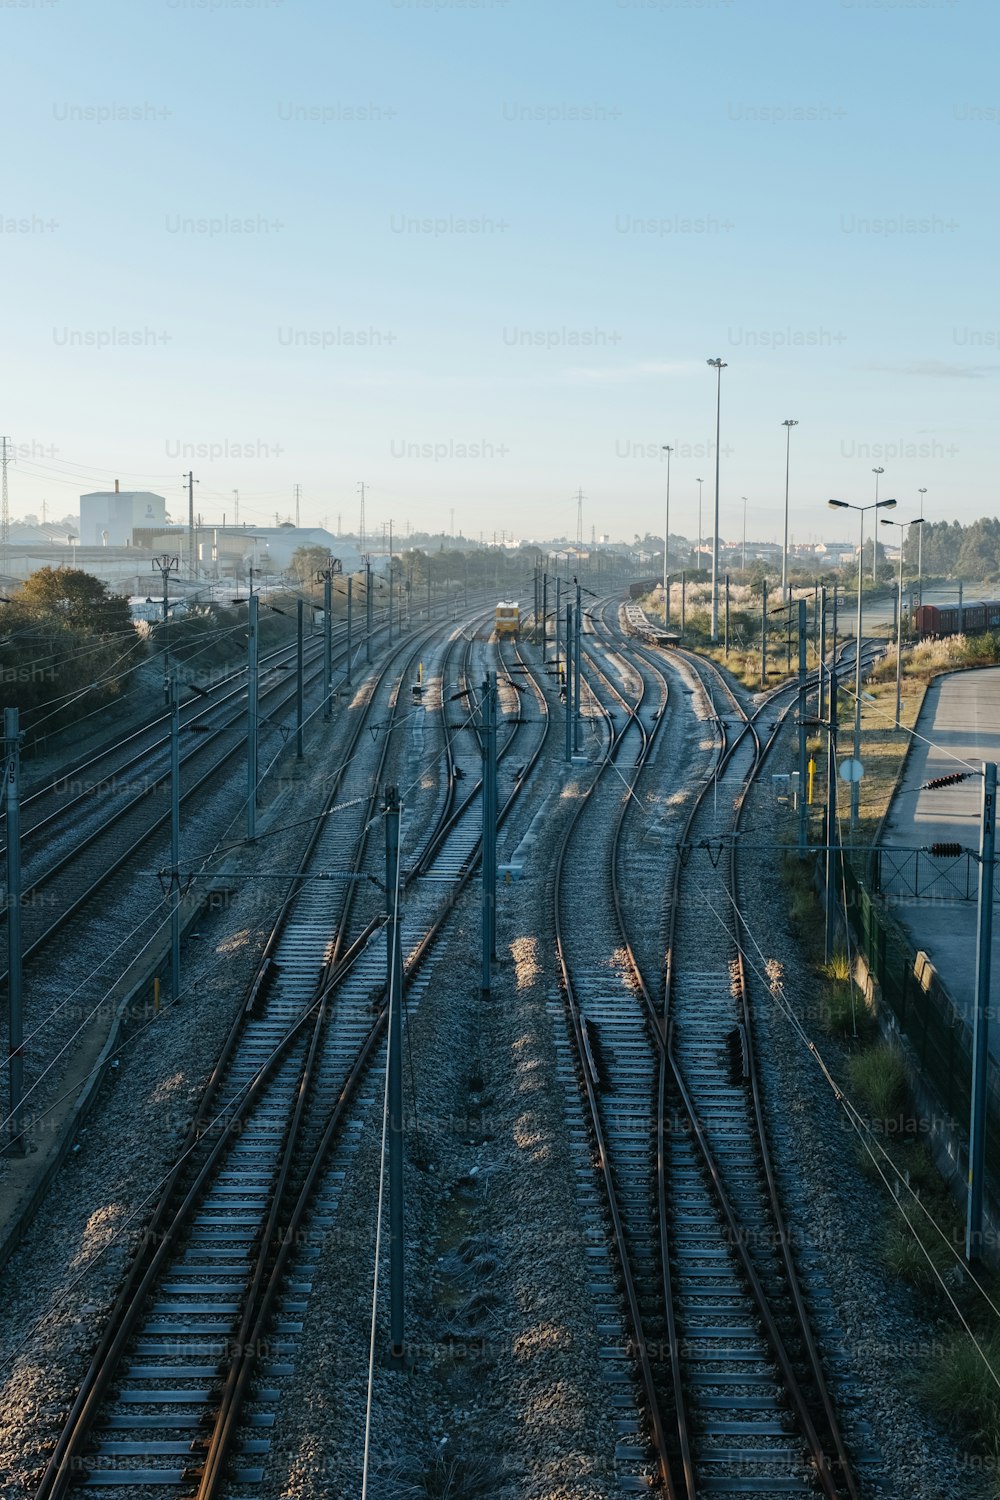 a view of a train yard with many tracks